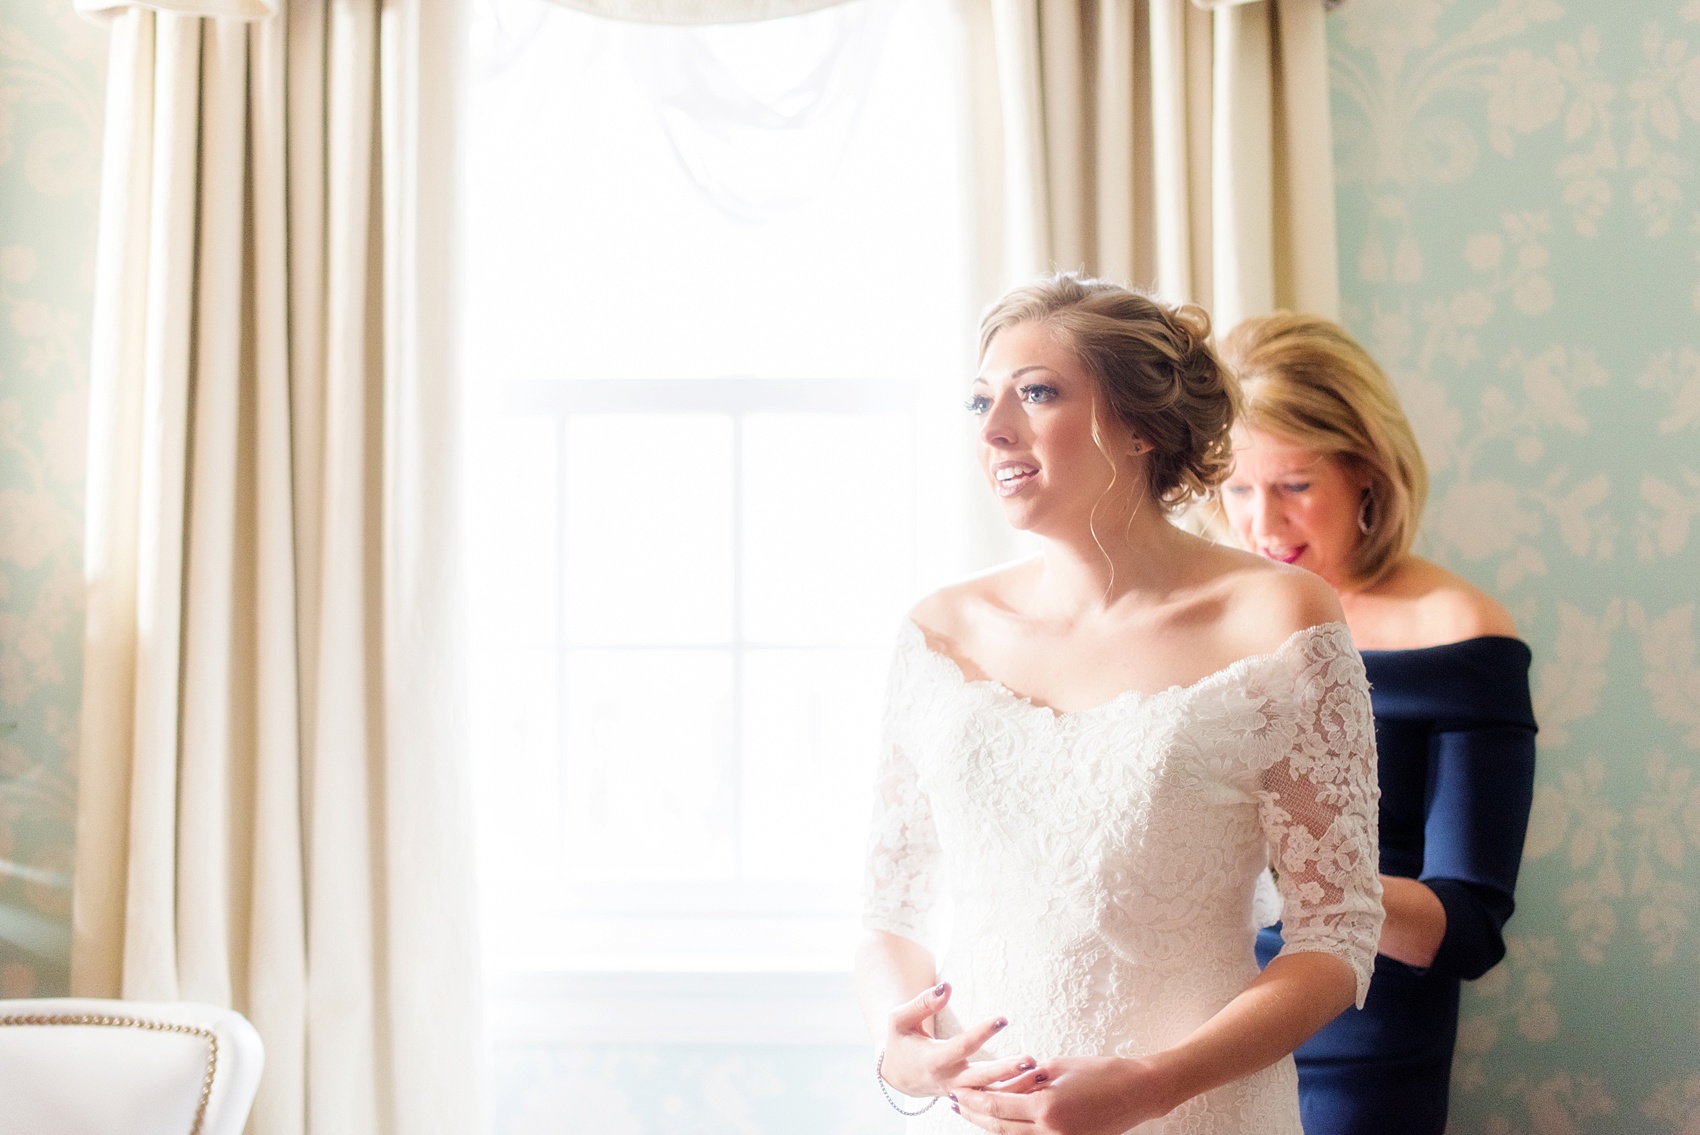 Beautiful wedding photos at The Carolina Inn at Chapel Hill, North Carolina by Mikkel Paige Photography. Photo of the bride's mother helping her get into her wedding gown - click through to see the rest of this gorgeous winter wedding! #thecarolinainn